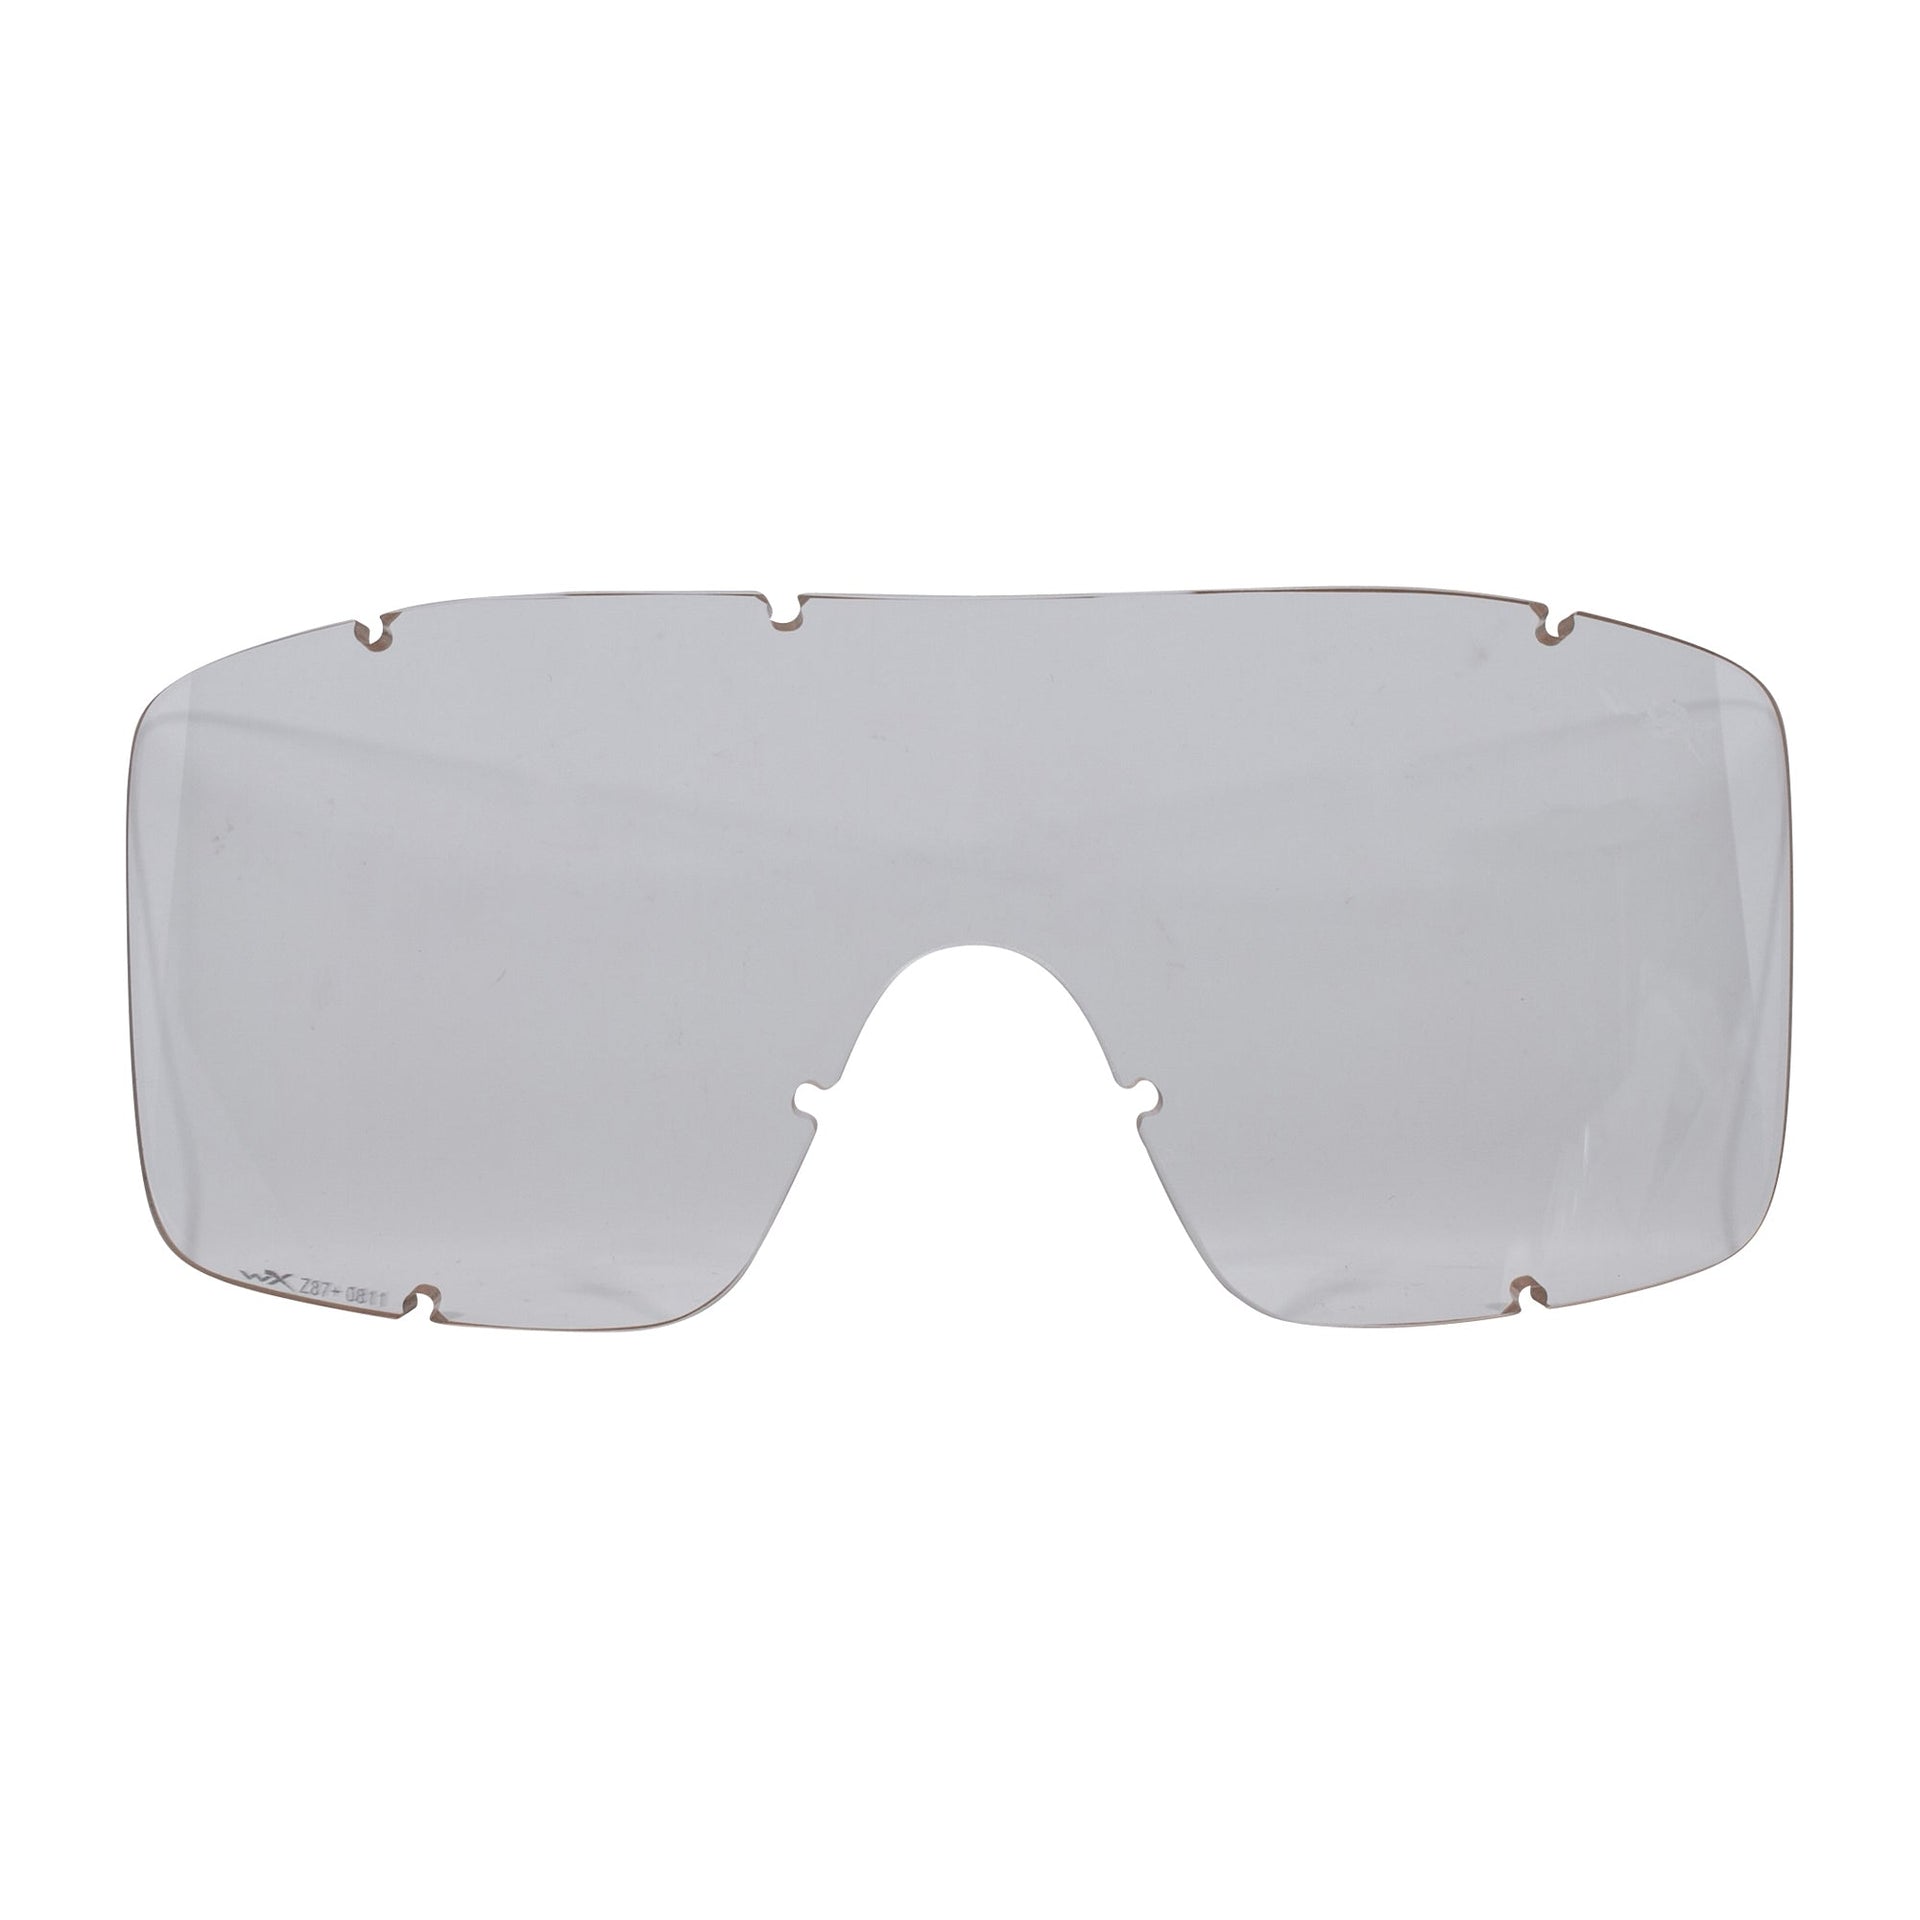 Replacement Lens Patriot clear